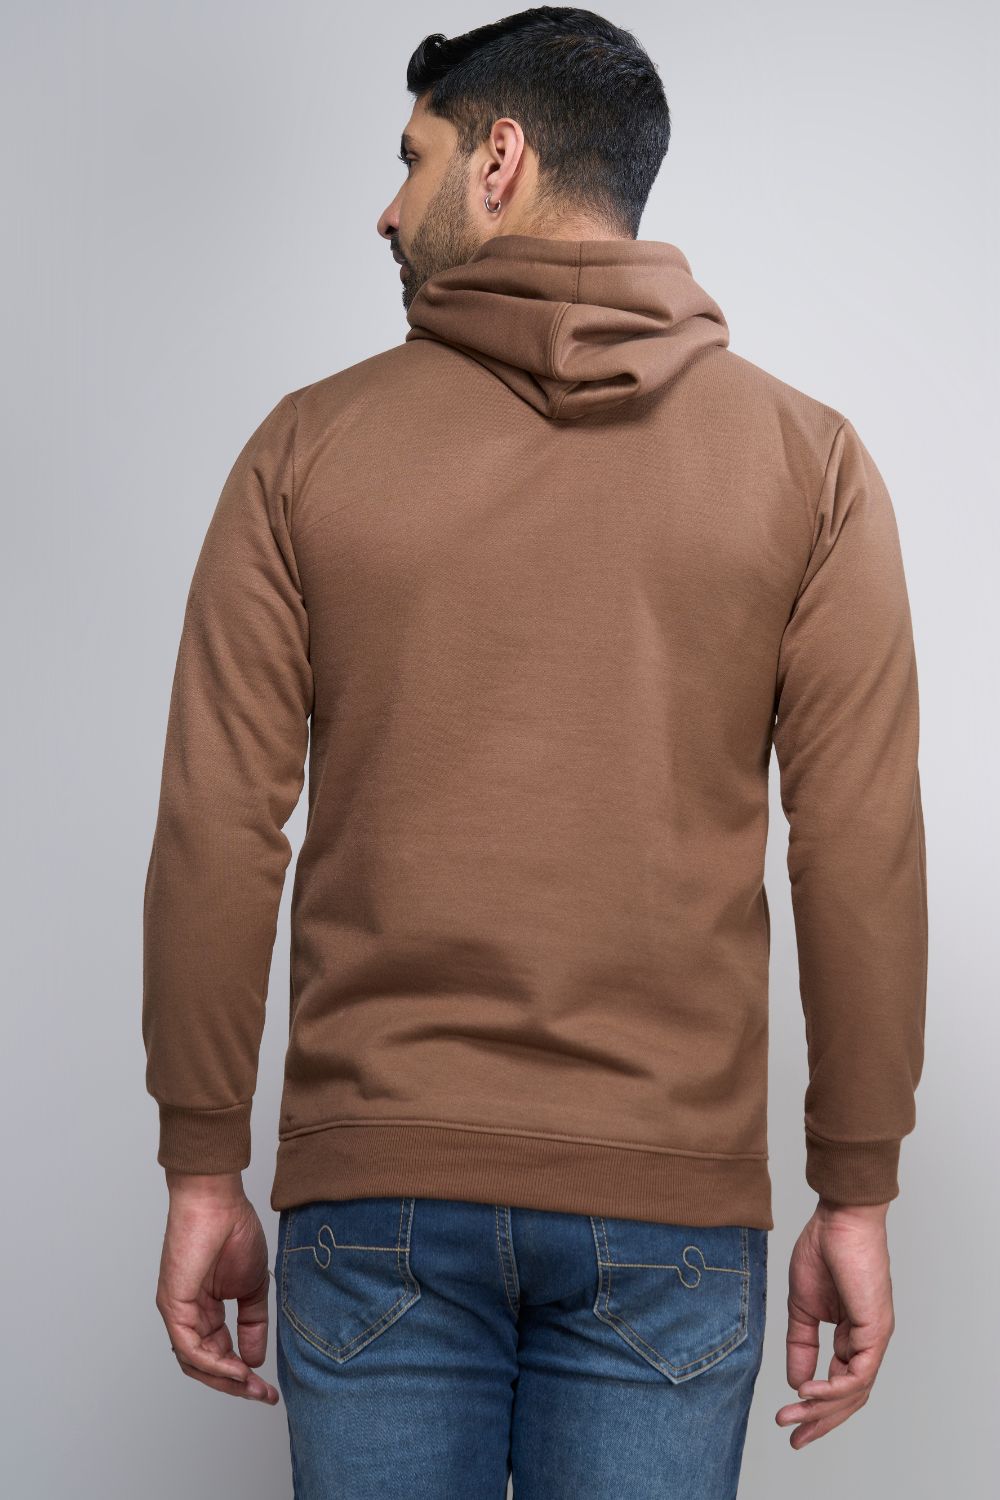 Dark Tan colored, hoodie for men with full sleeves and relaxed fit, Back View.